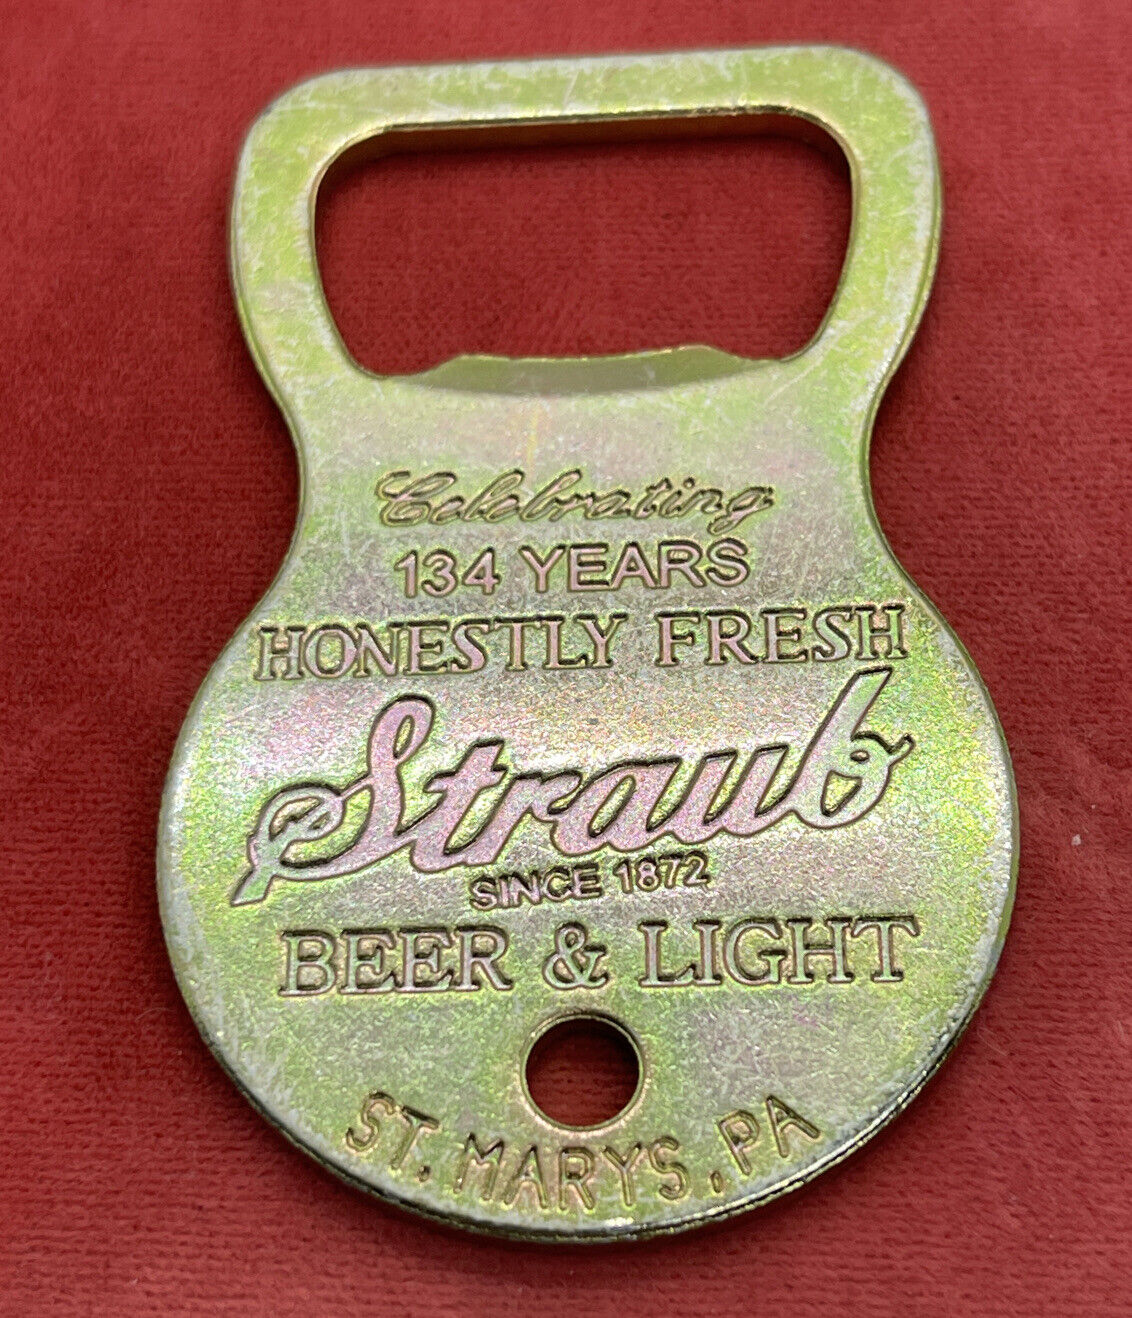 Vintage Bottle Opener Advertising Pcc Strawb Beer And Light St Mary’s Pa